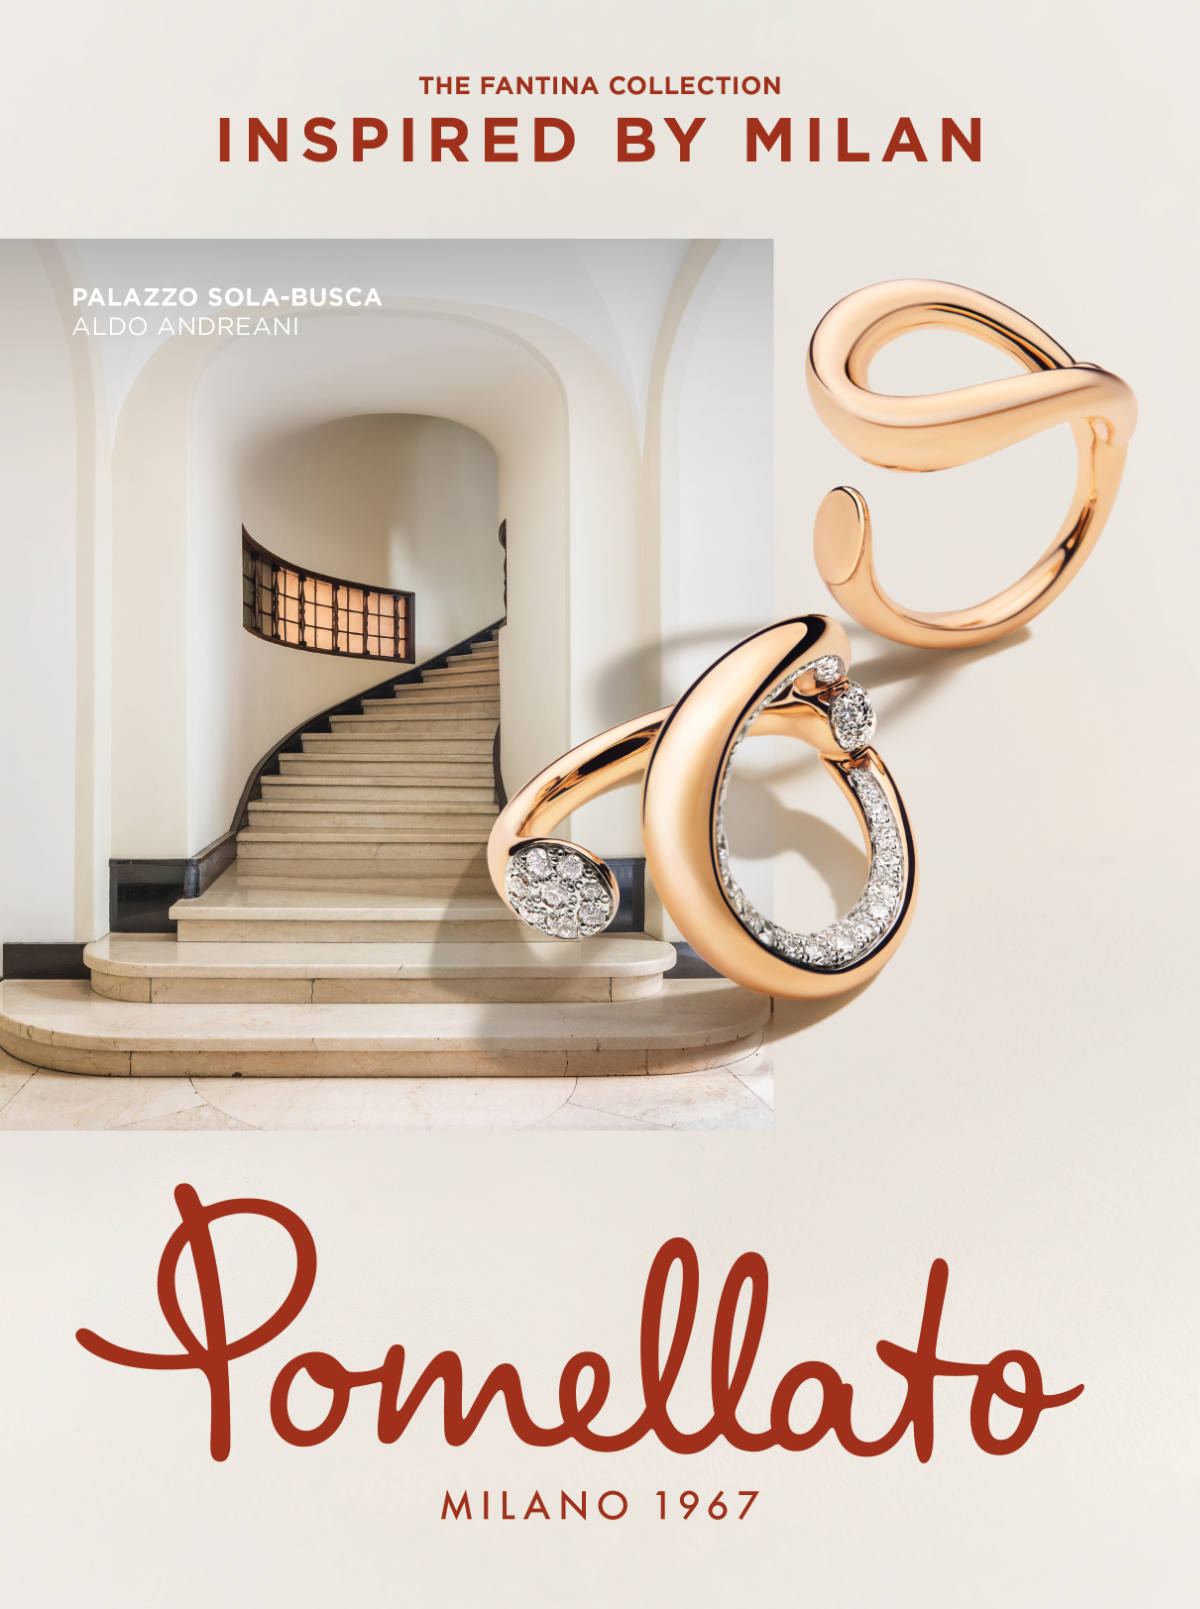 Pomellato Unveiled Its New Global Advertising Campaign Celebrating Milan’s Creative Genius